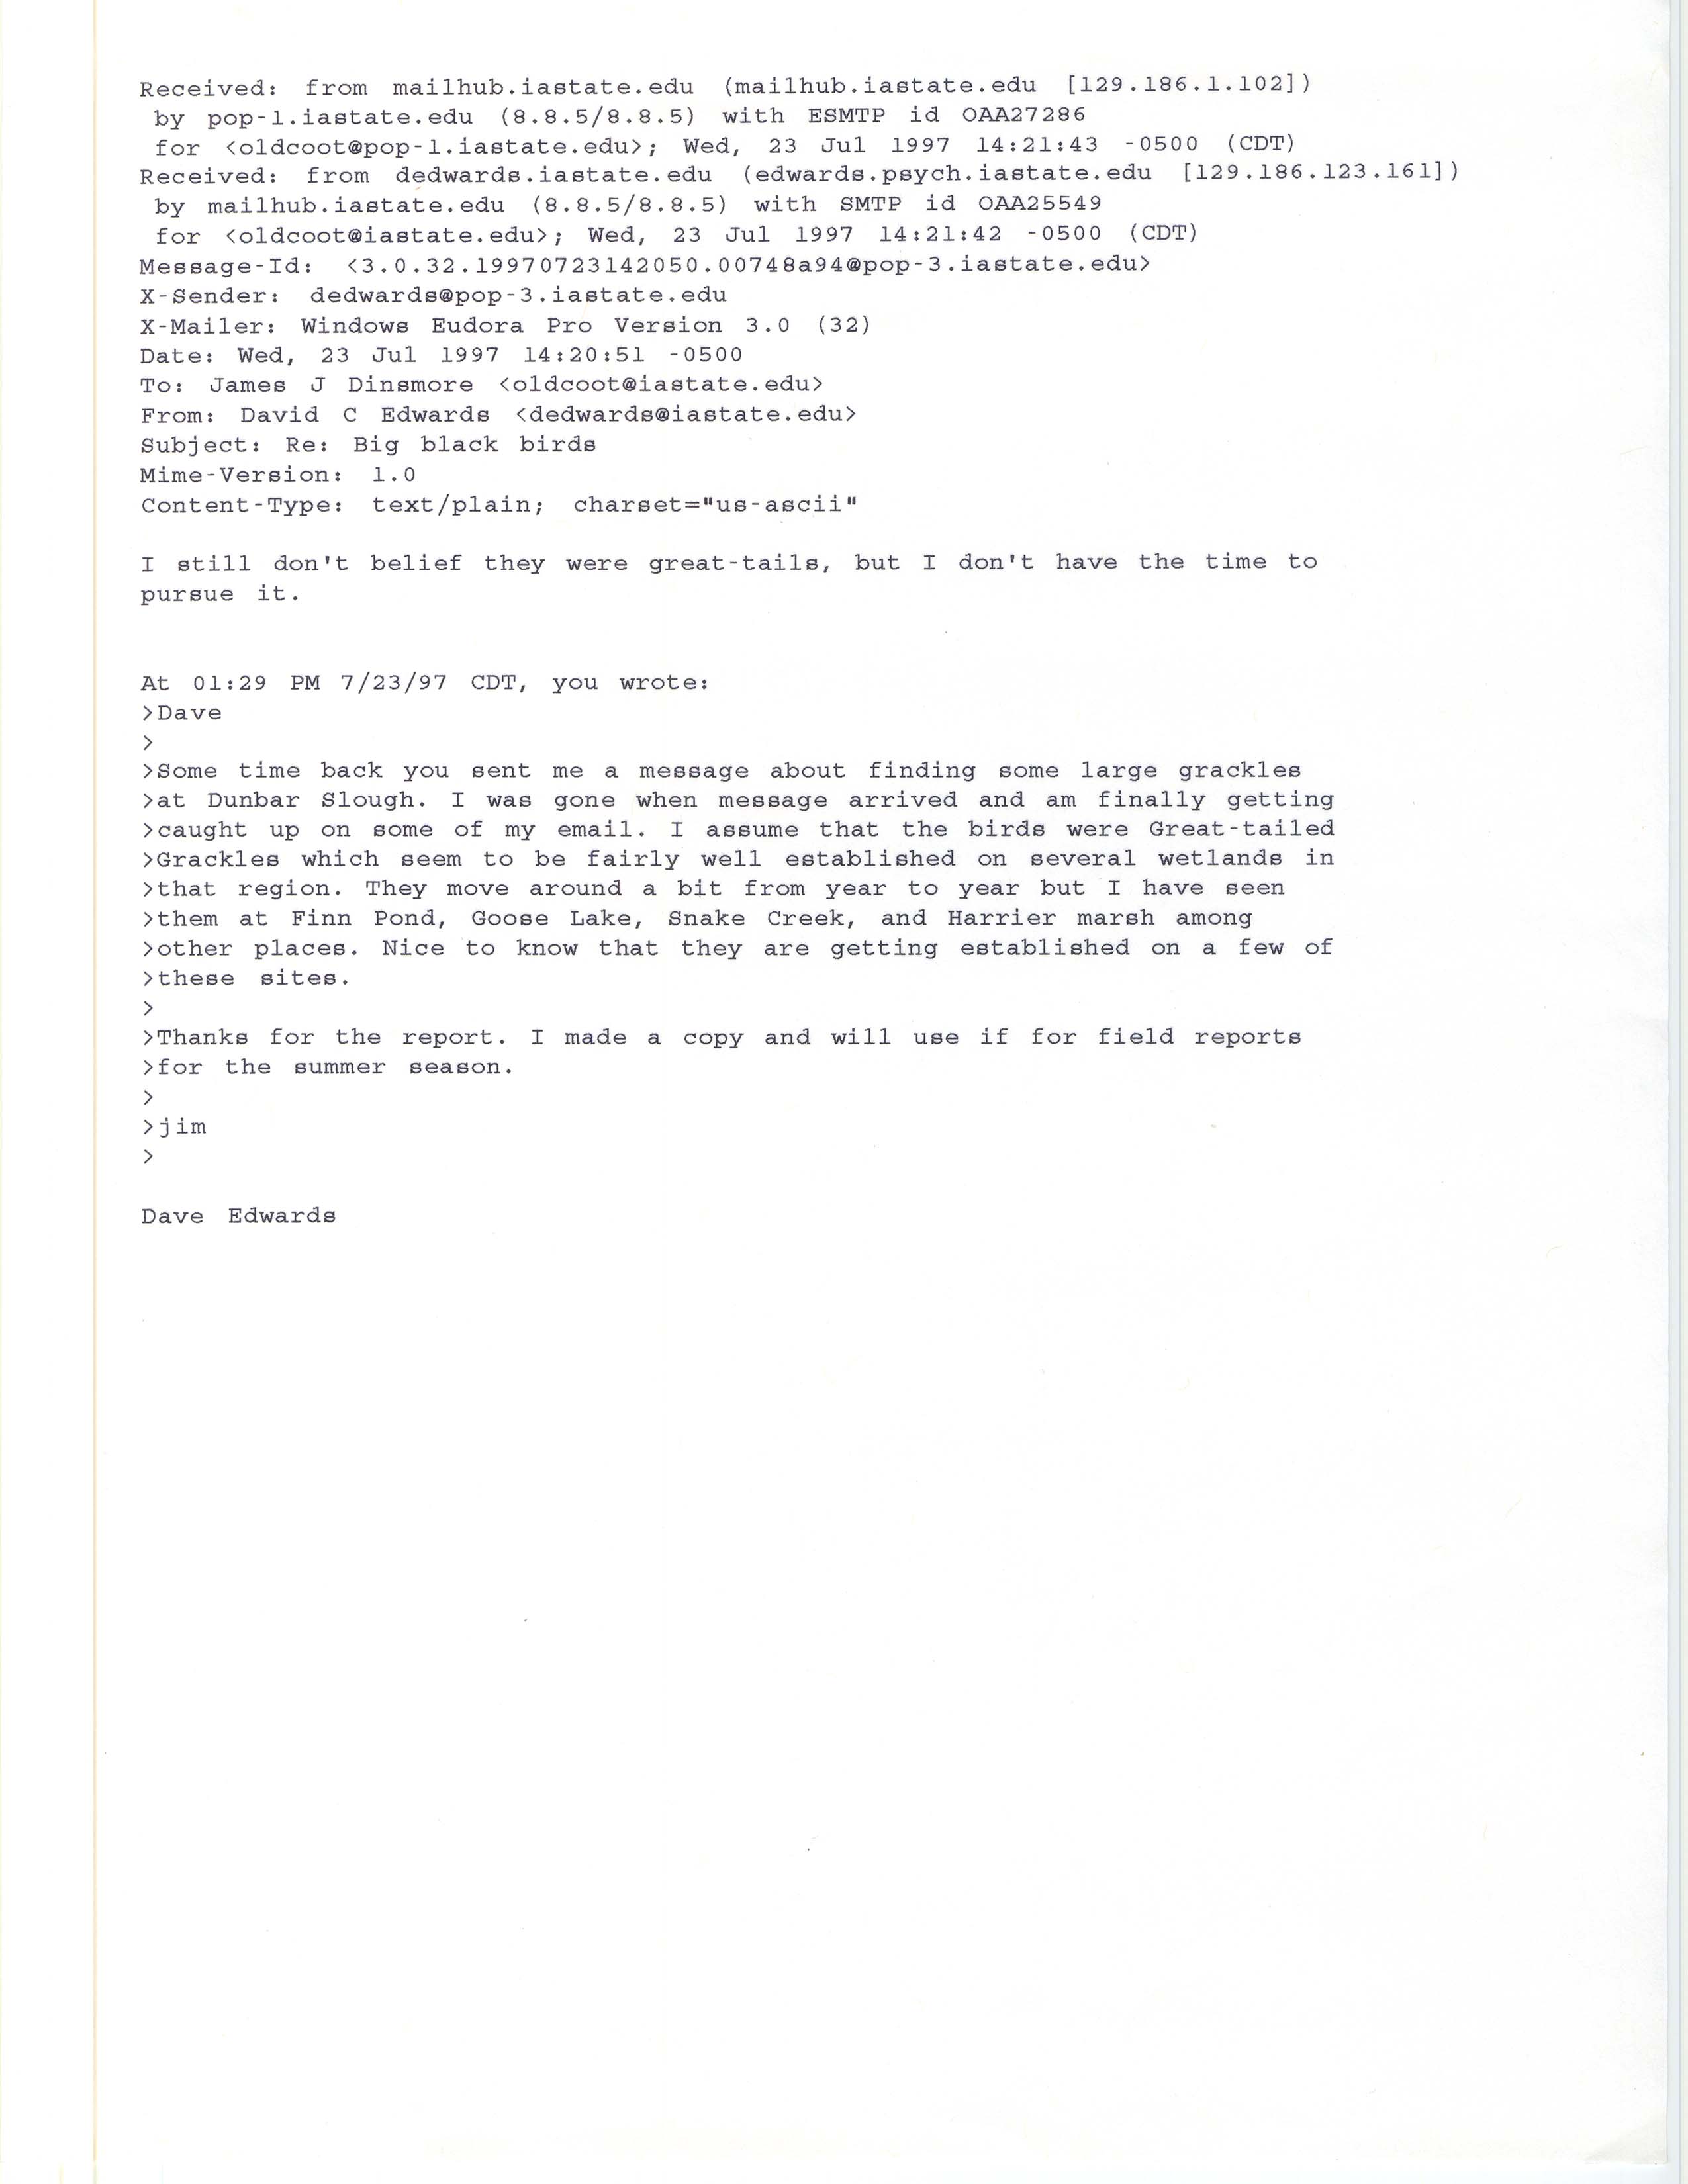 David C. Edwards email response to James J. Dinsmore regarding a possible Great-tailed Grackle sighting, July 23, 1997 